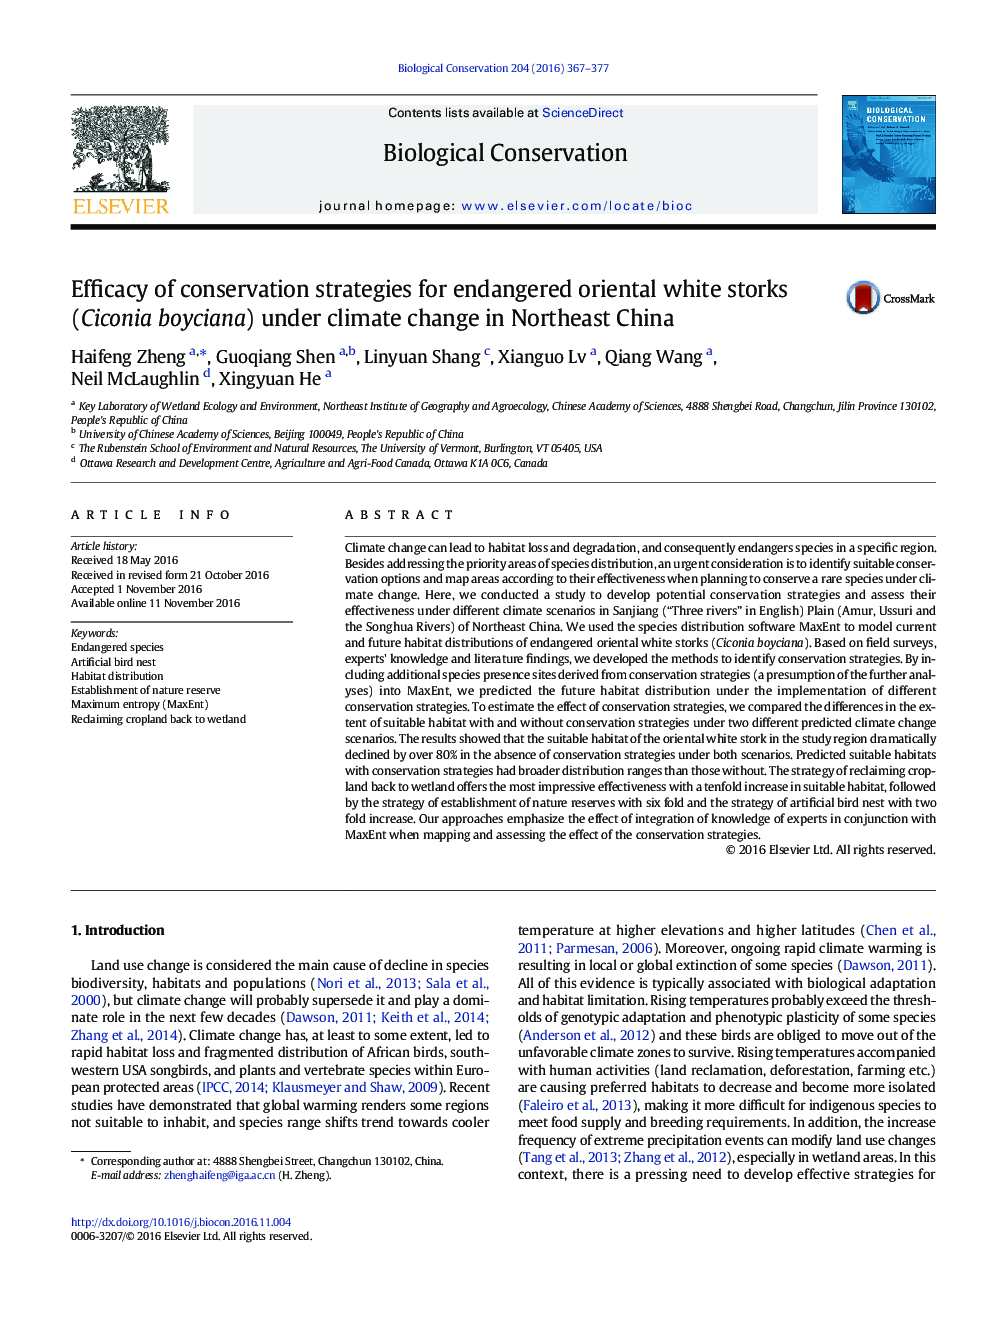 Efficacy of conservation strategies for endangered oriental white storks (Ciconia boyciana) under climate change in Northeast China